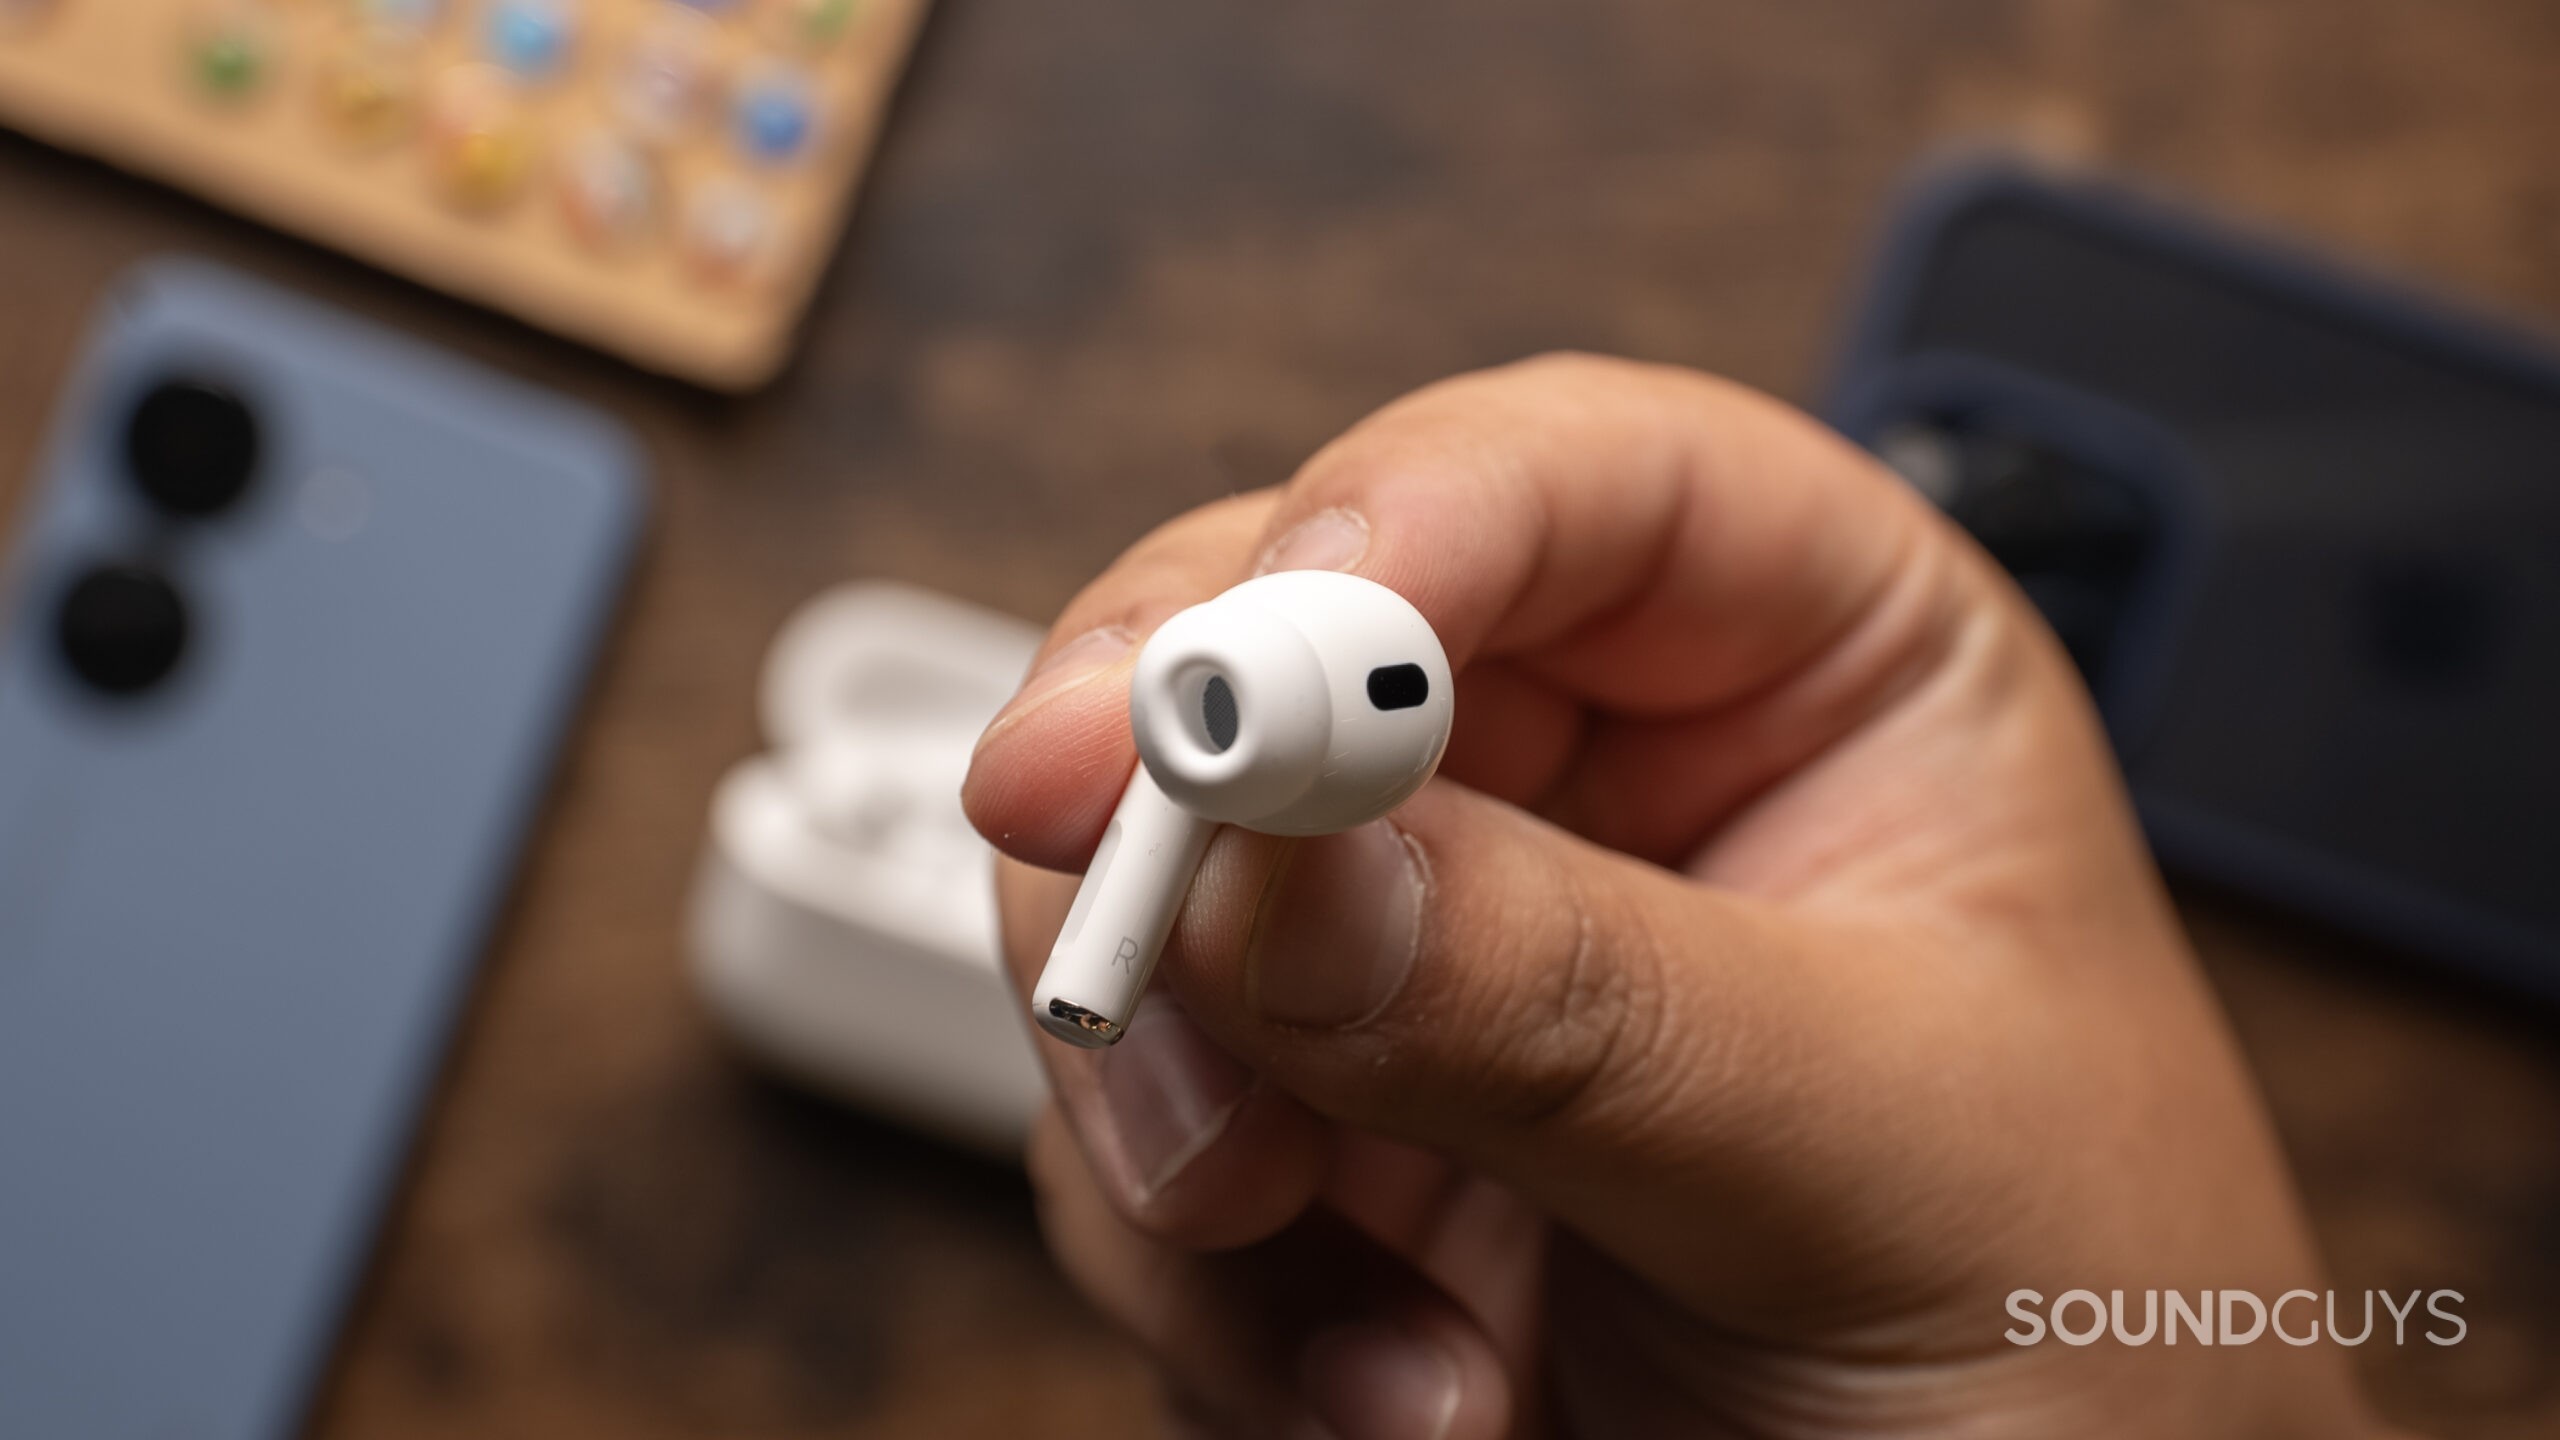 A hand holds the Apple AirPods Pro (2nd generation) bud showing the ear tips.